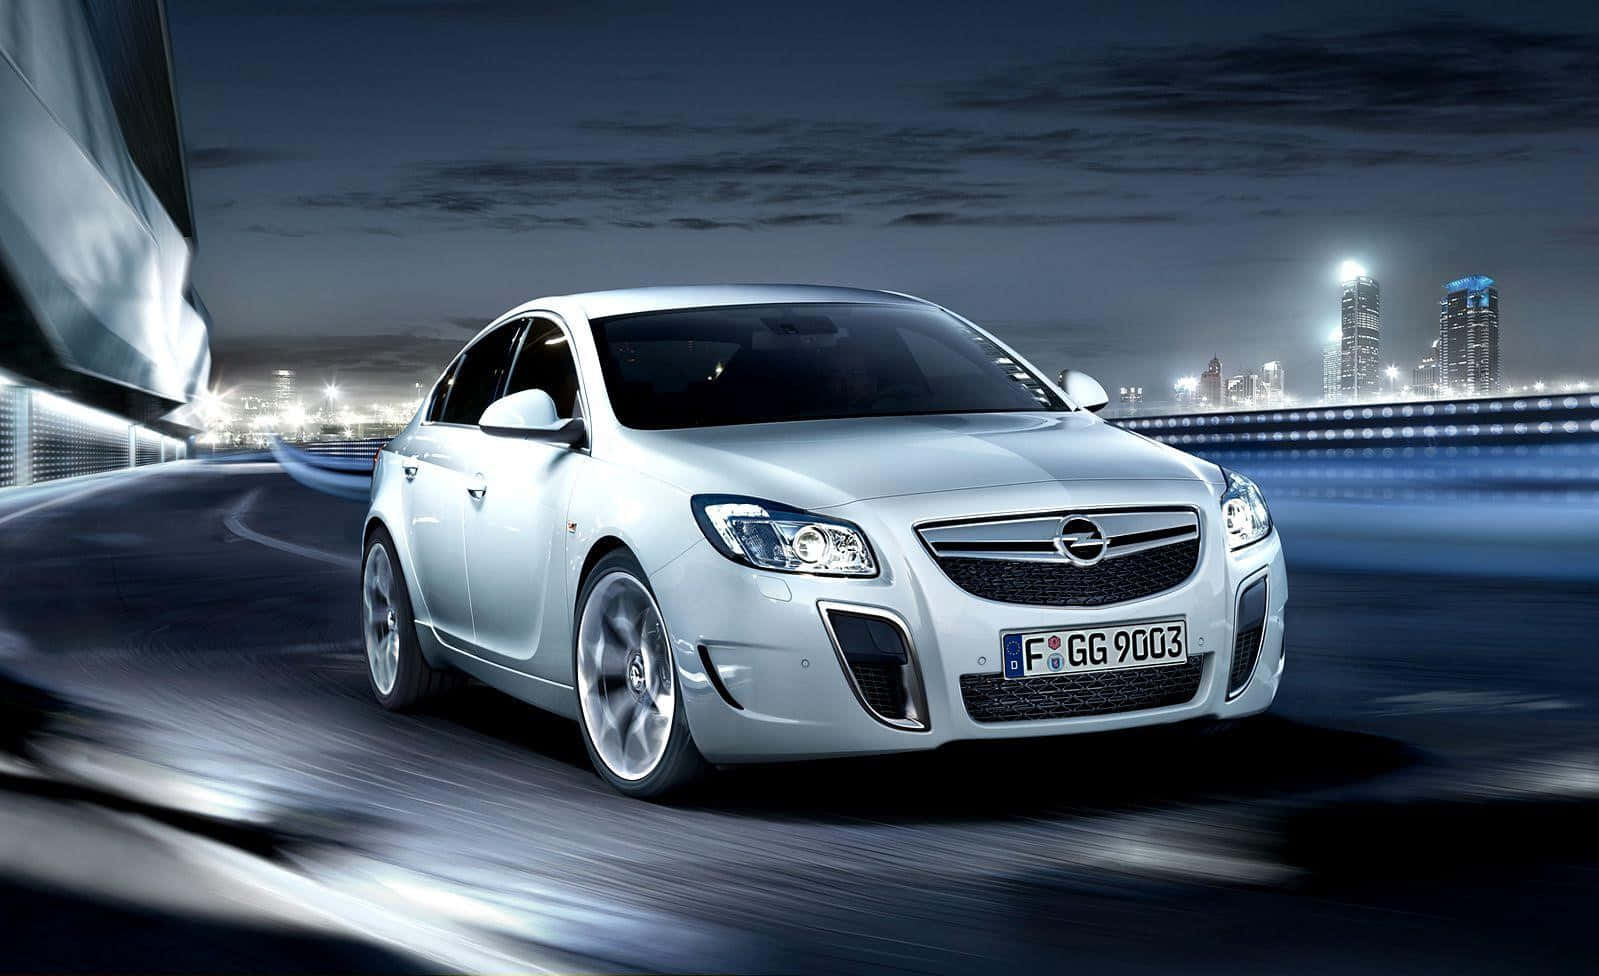 Opel Insignia on the Road Wallpaper